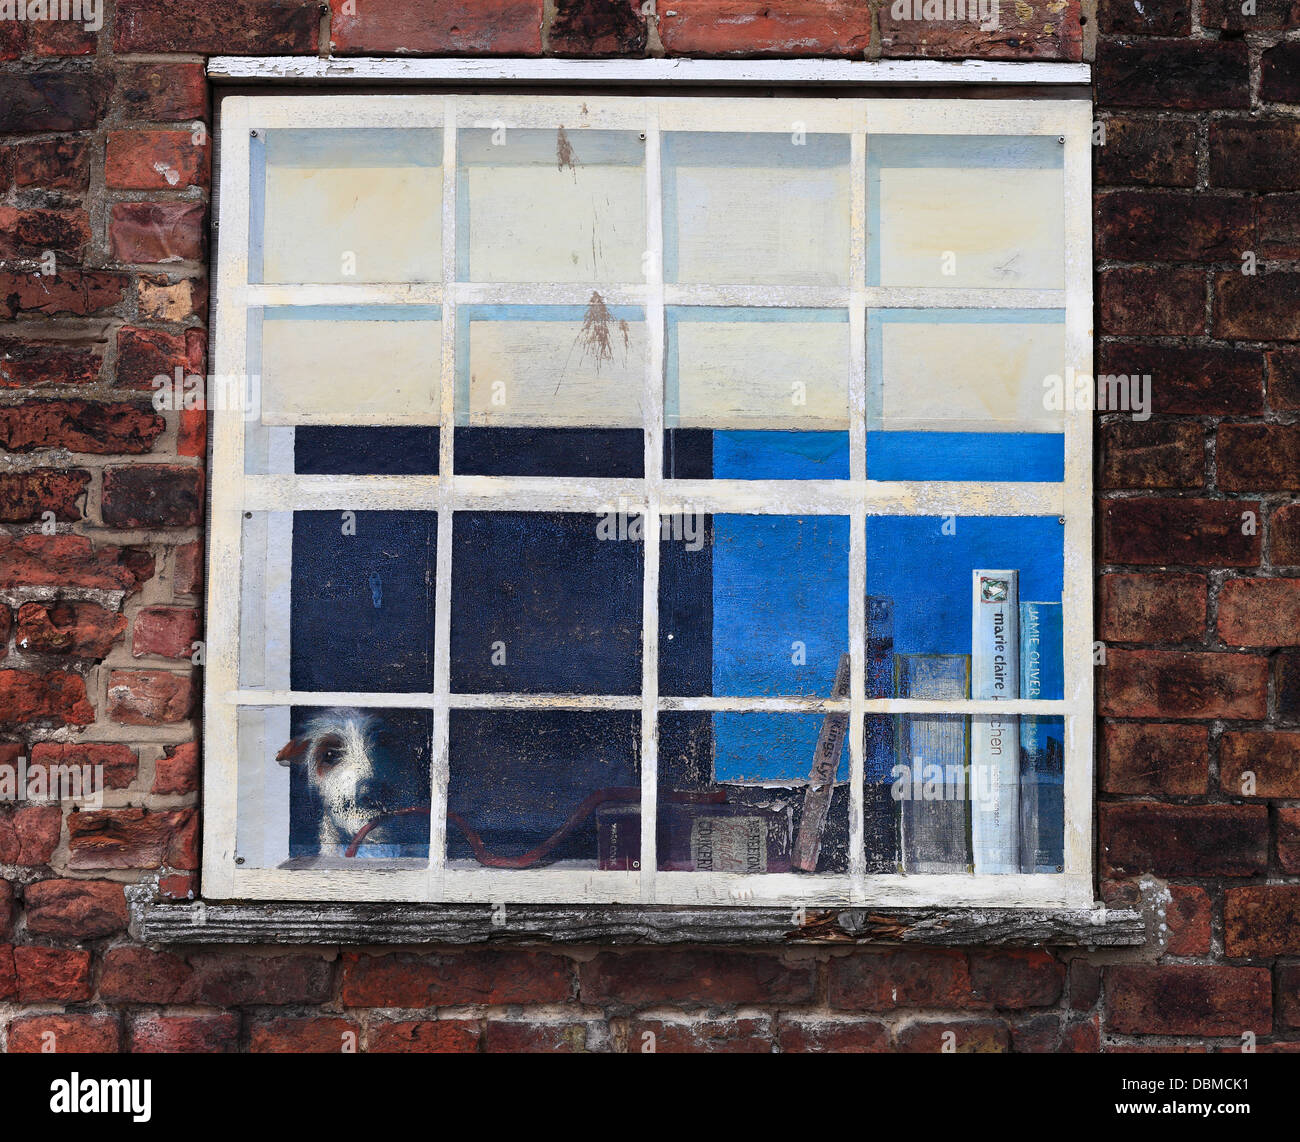 Painted window tromp l'oeil depicting a pet dog indoors. Stock Photo